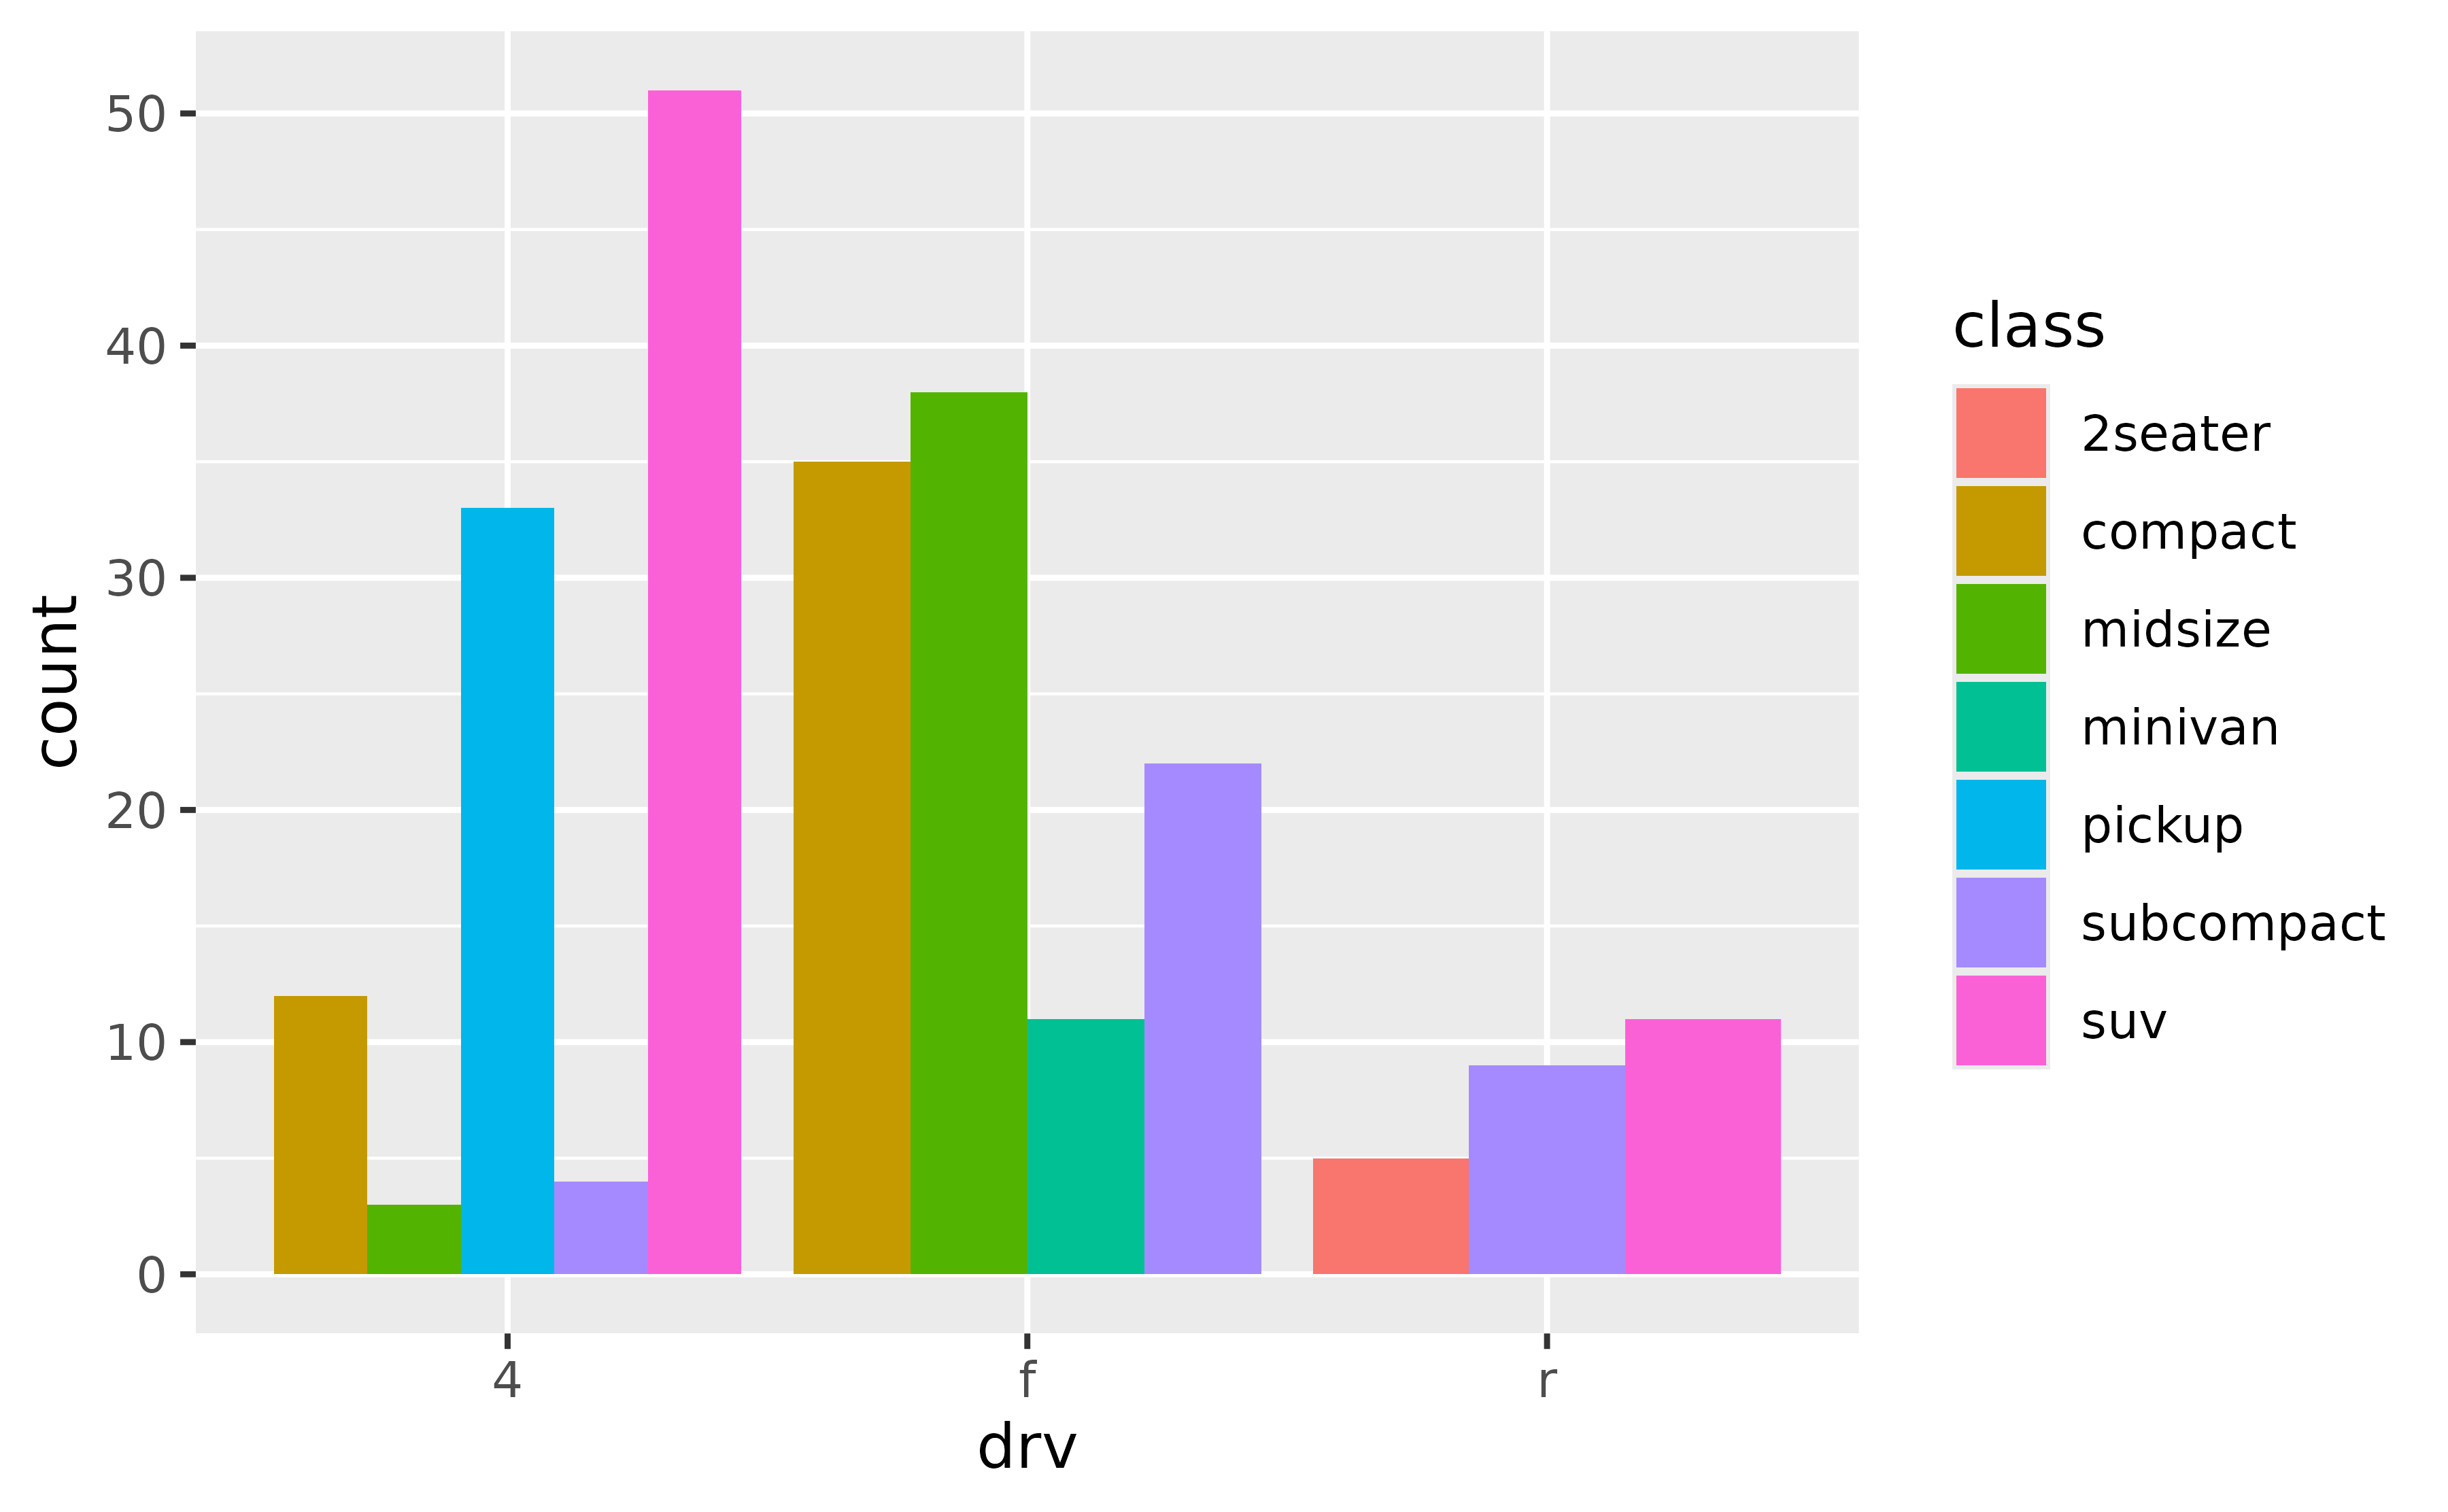 A grouped bar chart showing car counts dodged and filled by 7 types of cars for each of three types of drive train. The left group has 5 narrower bars, the middle group has 4 bars and the right group has 3 wider bars.